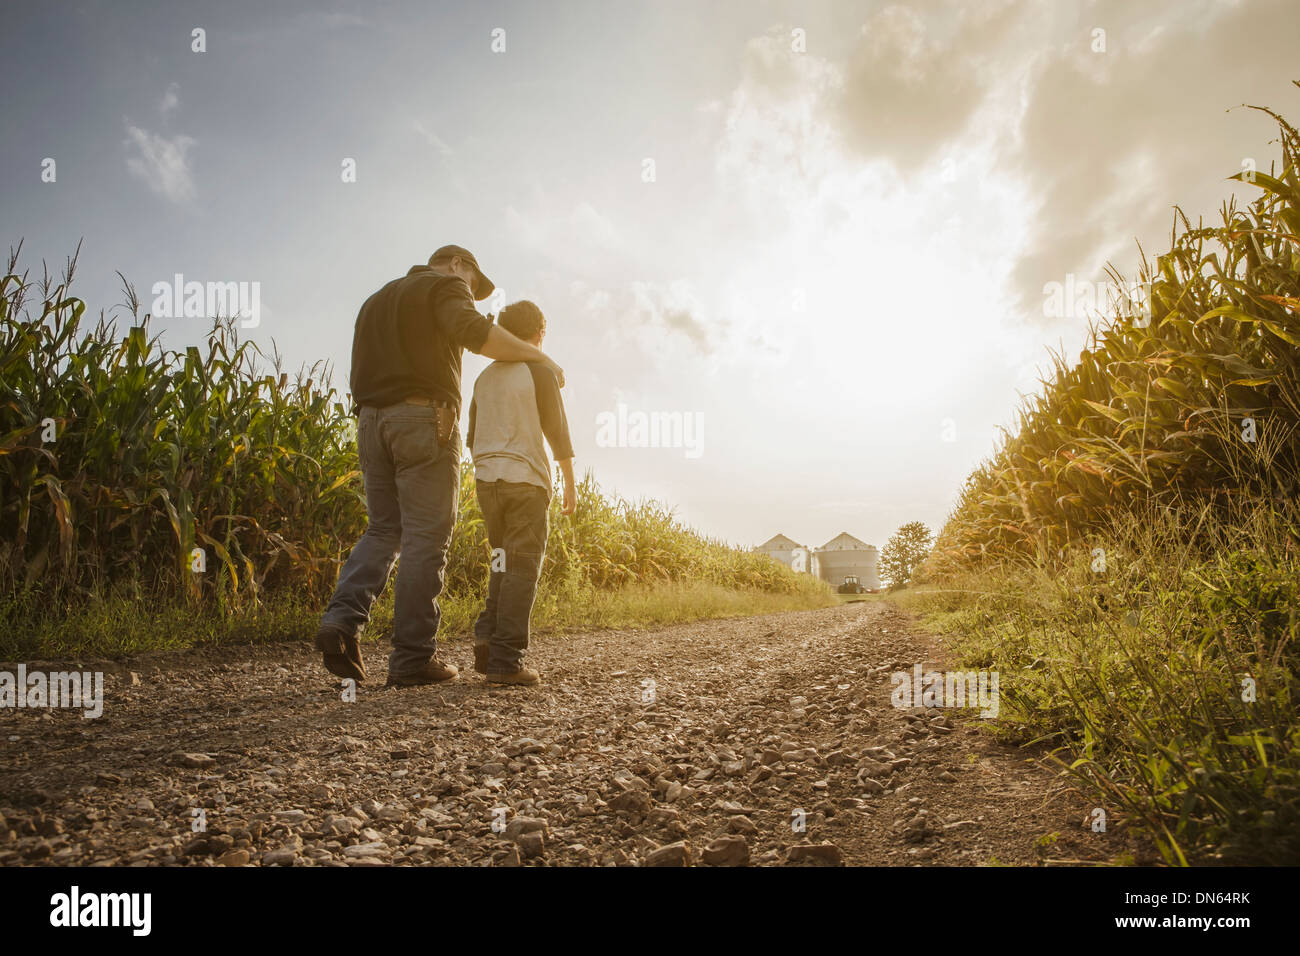 Caucasian father and son walking on dirt road through farm Banque D'Images